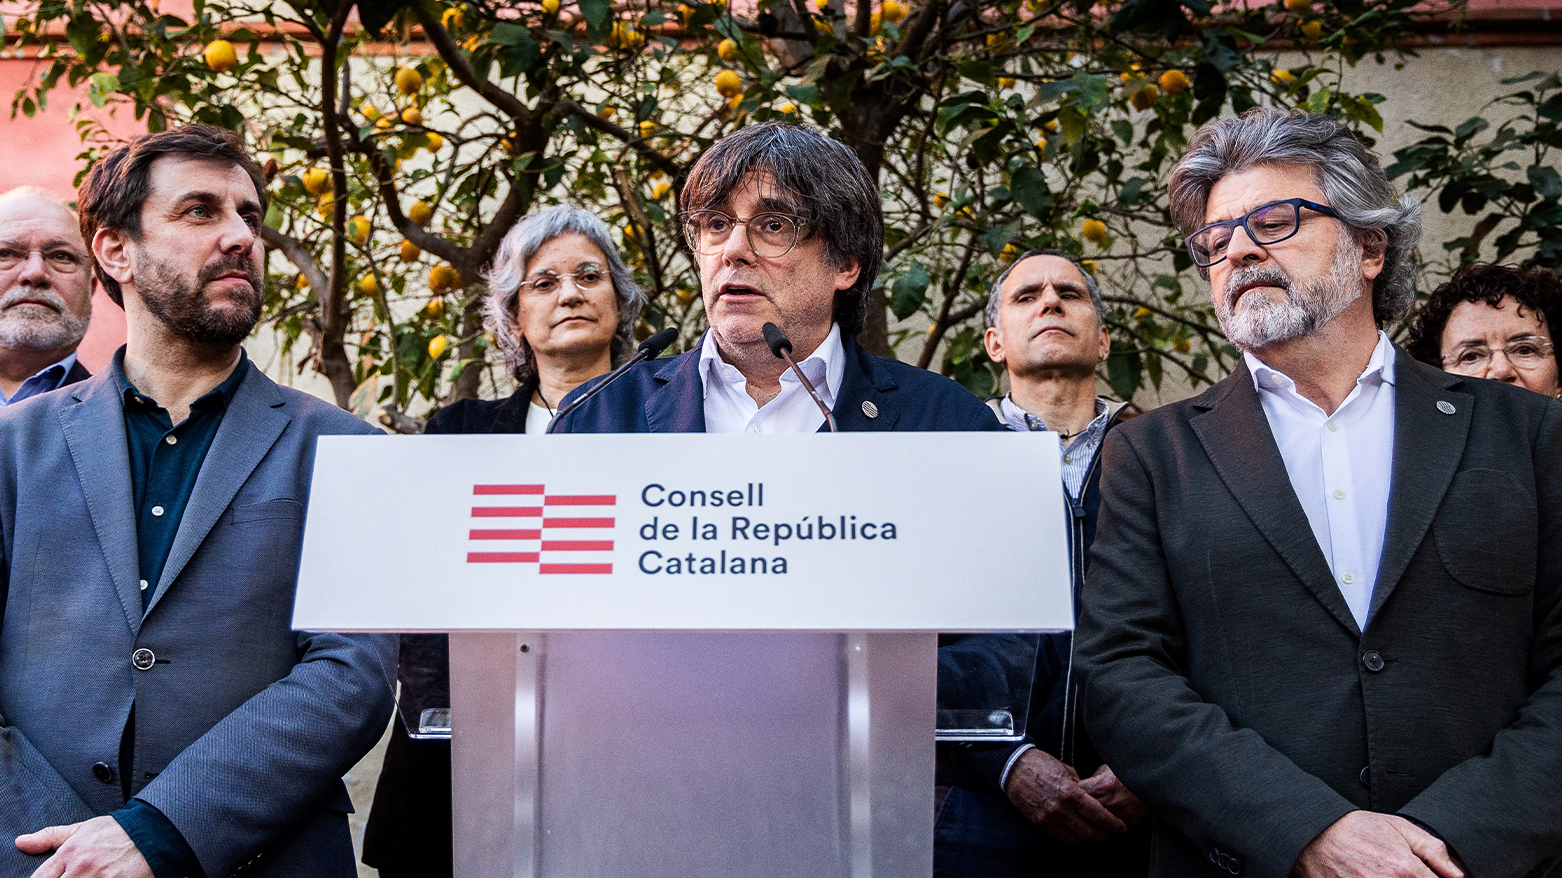 Exiled former Catalan leader, Spanish Member of the European Parliament and founder of the Junts per Catalunya ("Together for Catalonia") party Carles Puigdemont speaks during a press conference. (Photo: AFP)